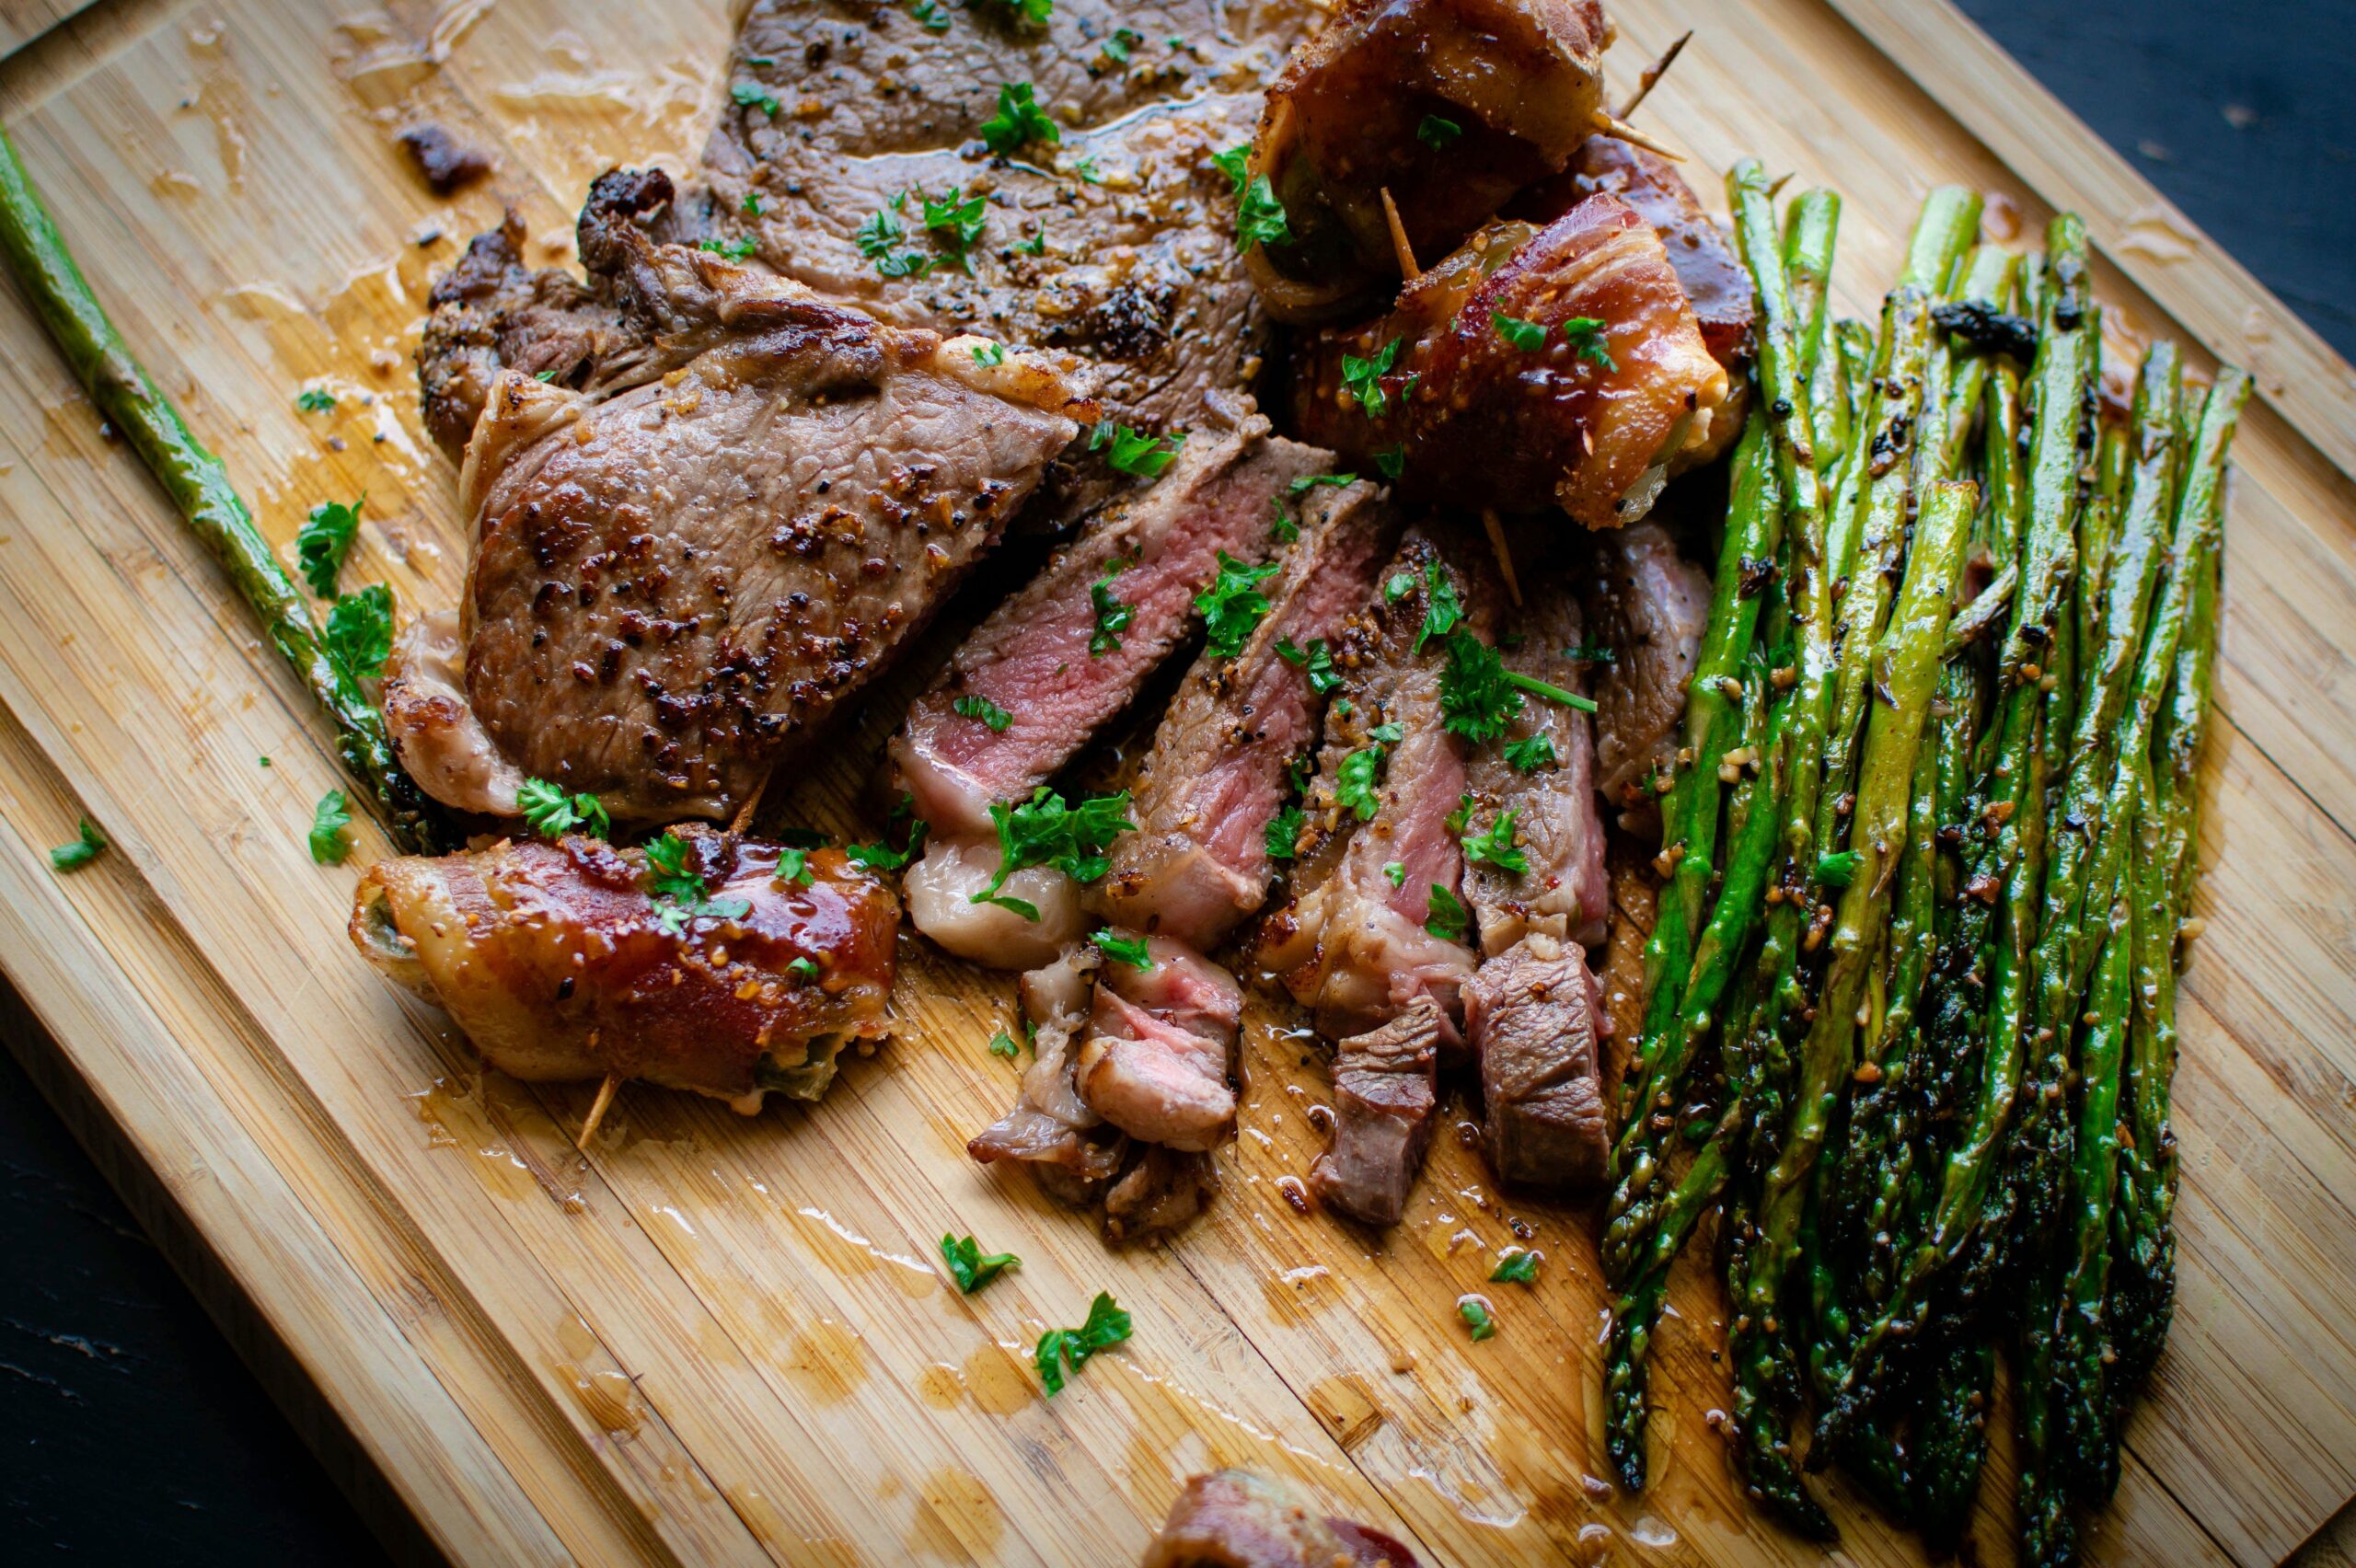 A surf and turf dinner is the perfect Sunday dinner idea. Pictured: Steak